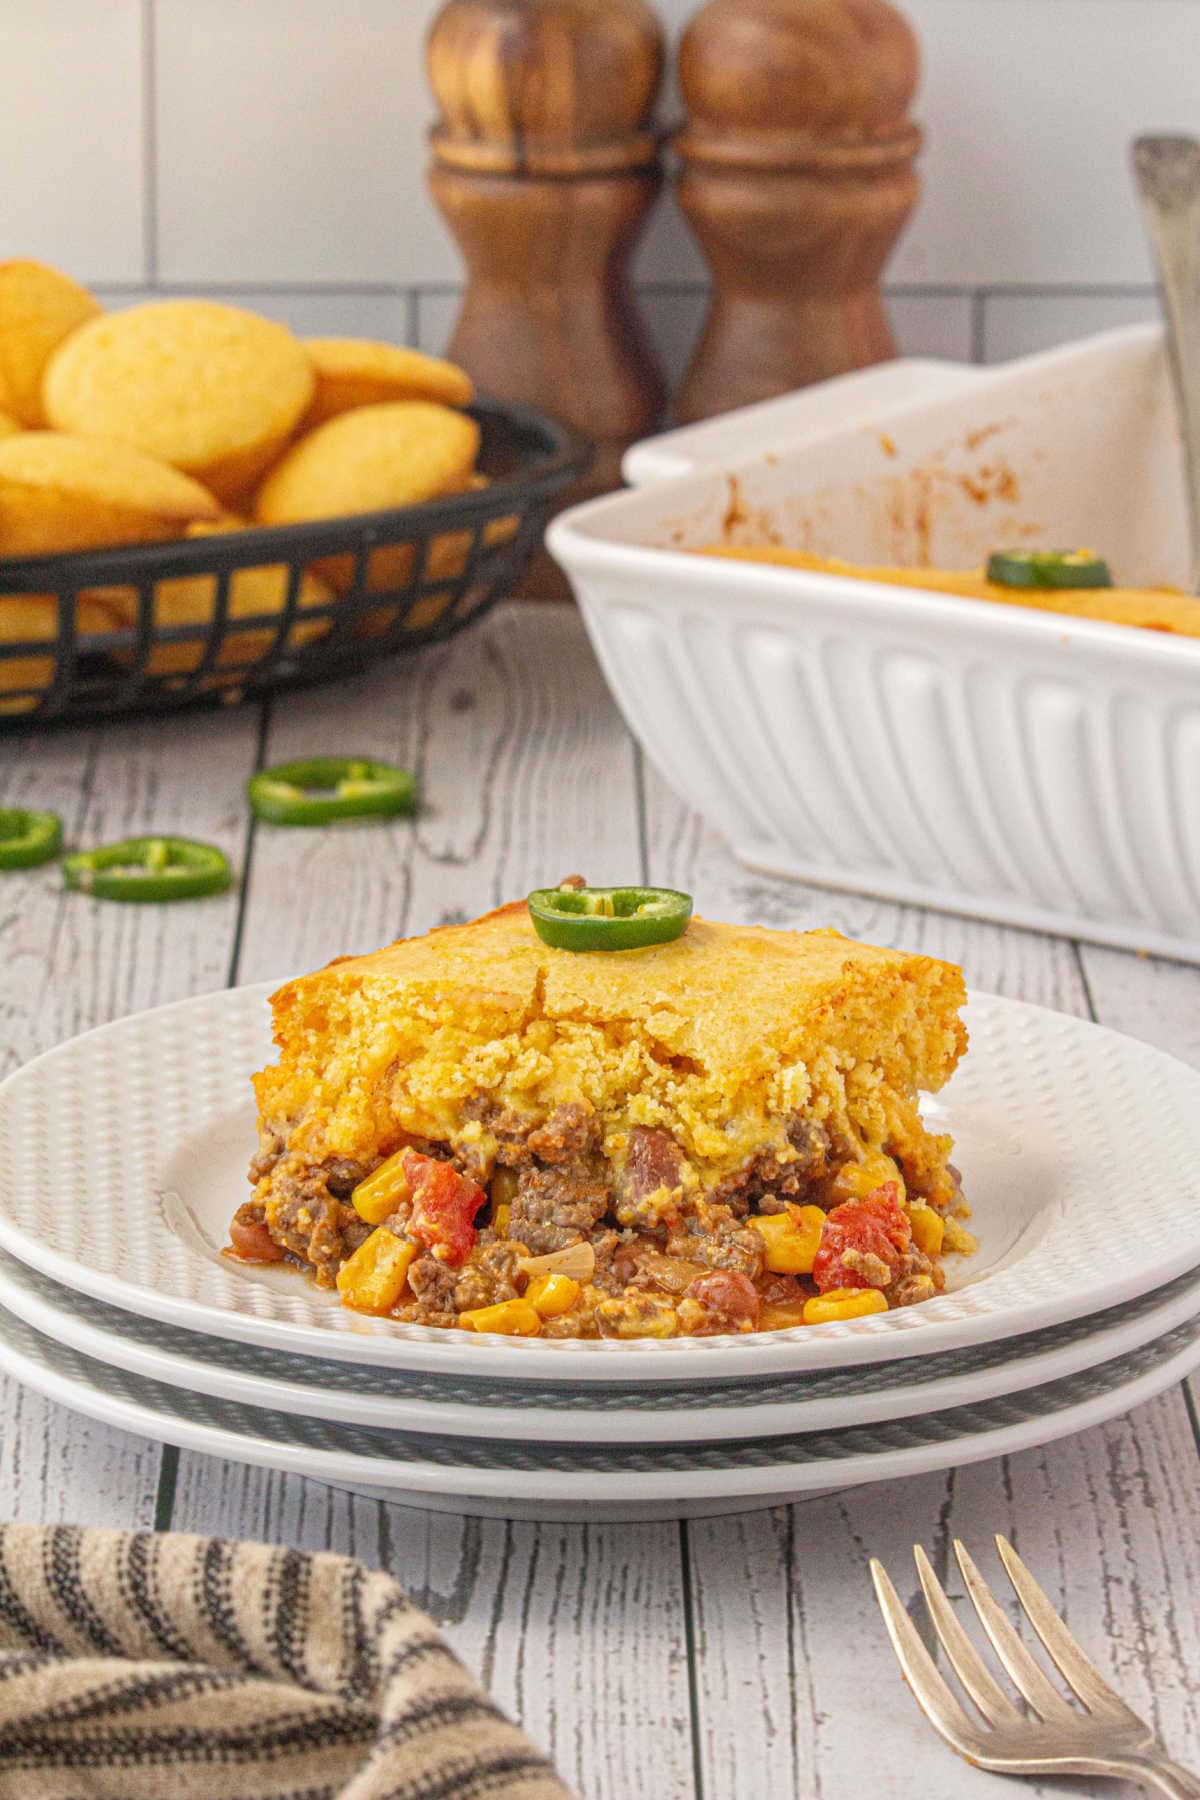 A serving of cornbread and ground beef casserole on a plate.